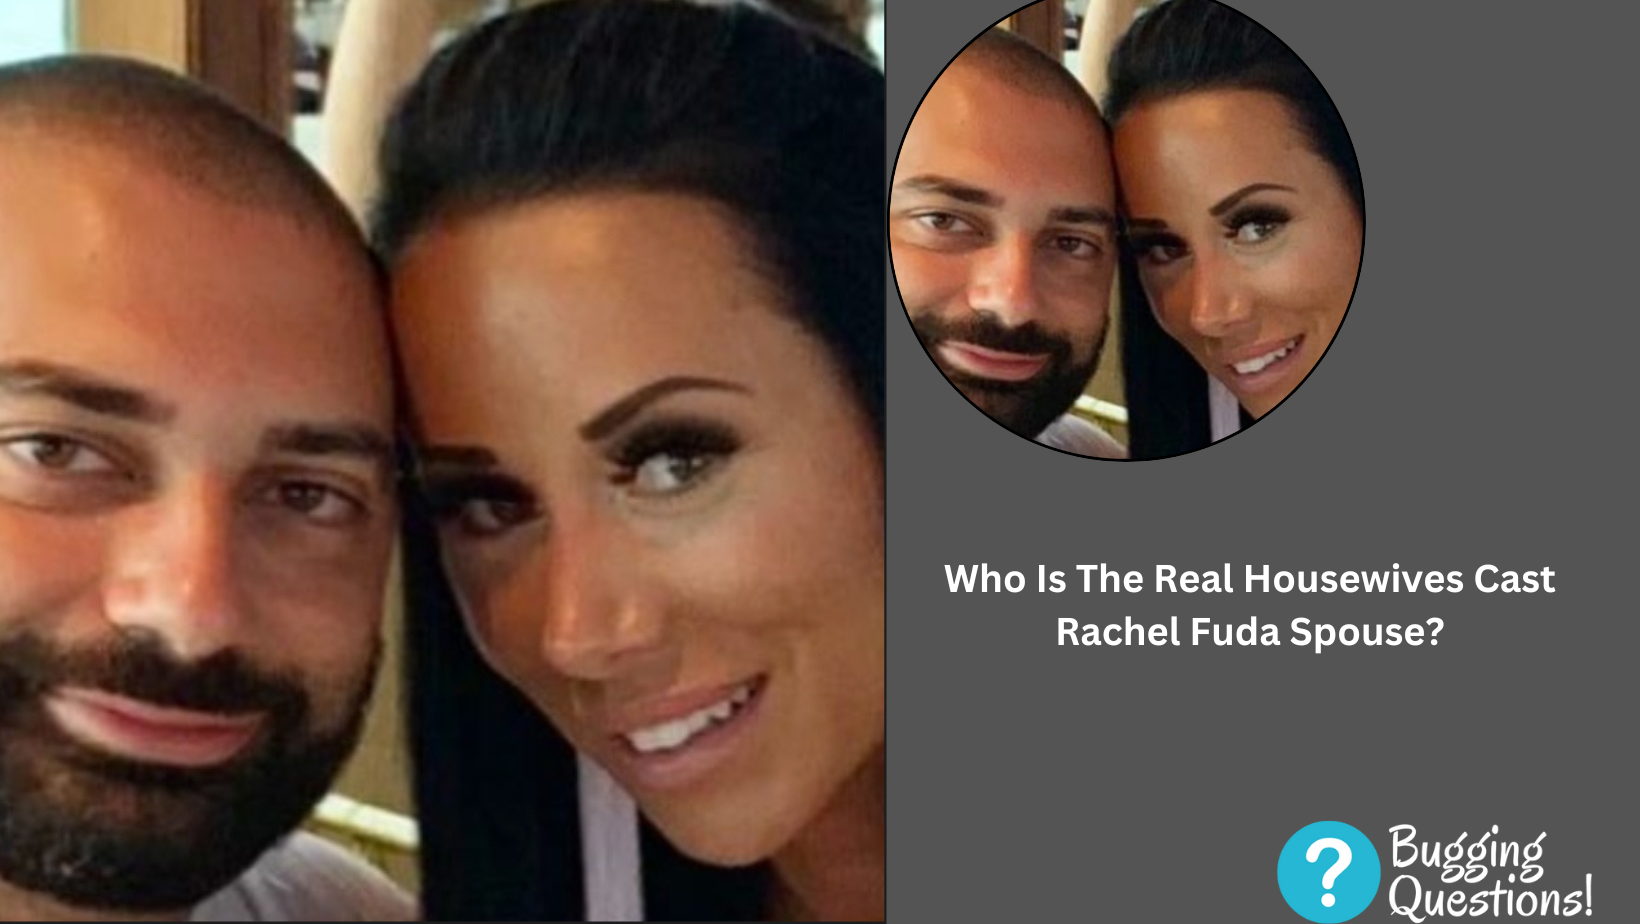 Who Is The Real Housewives Cast Rachel Fuda Spouse?